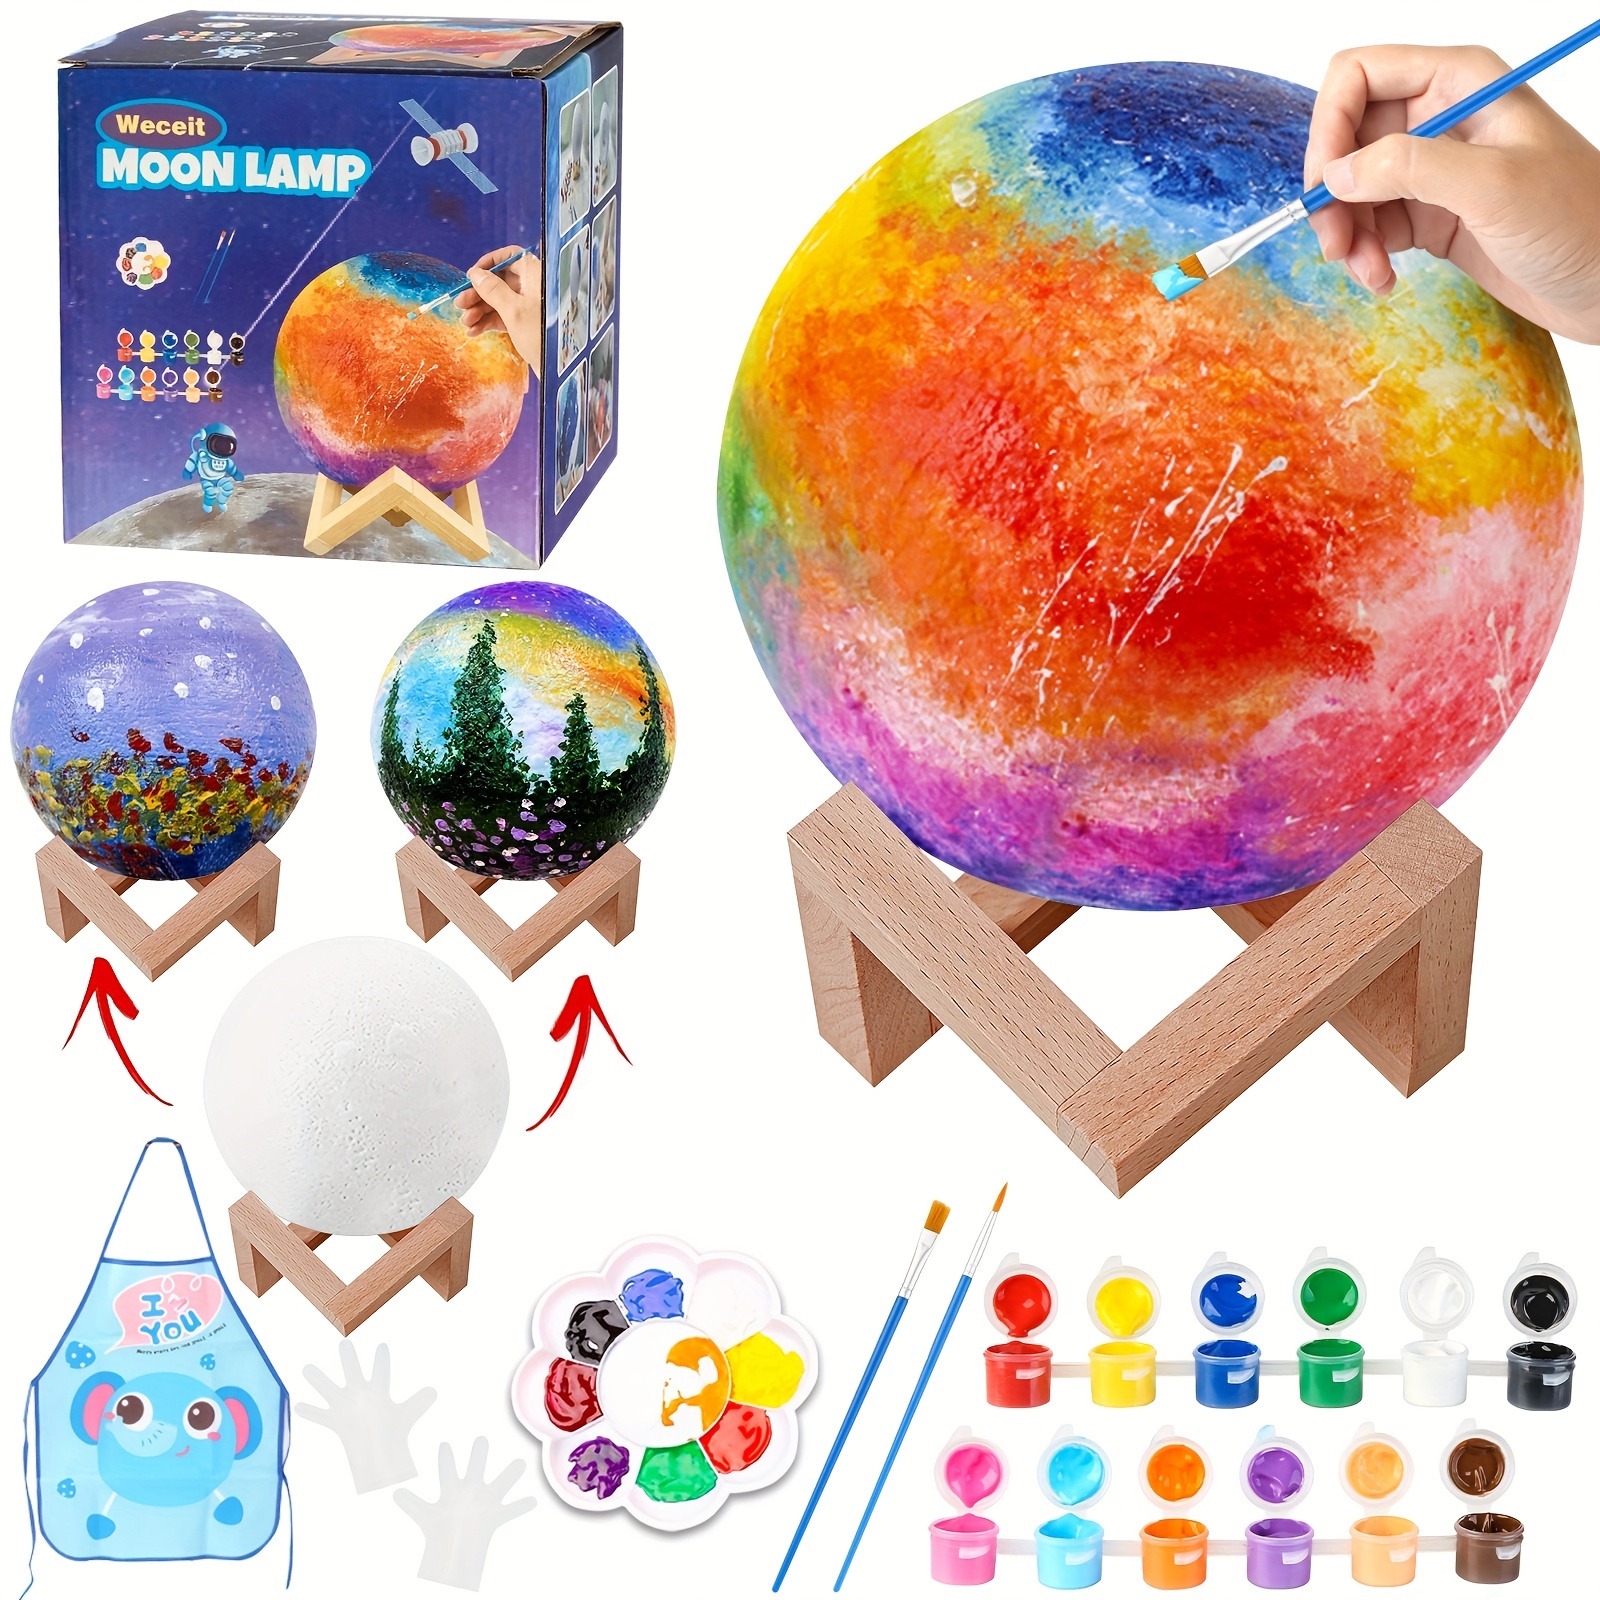 

Paint Your Own Moon Lamp Kit, Gifts For Kids Diy 3d Moon Light Cool Lamp For Teens Boys Girls